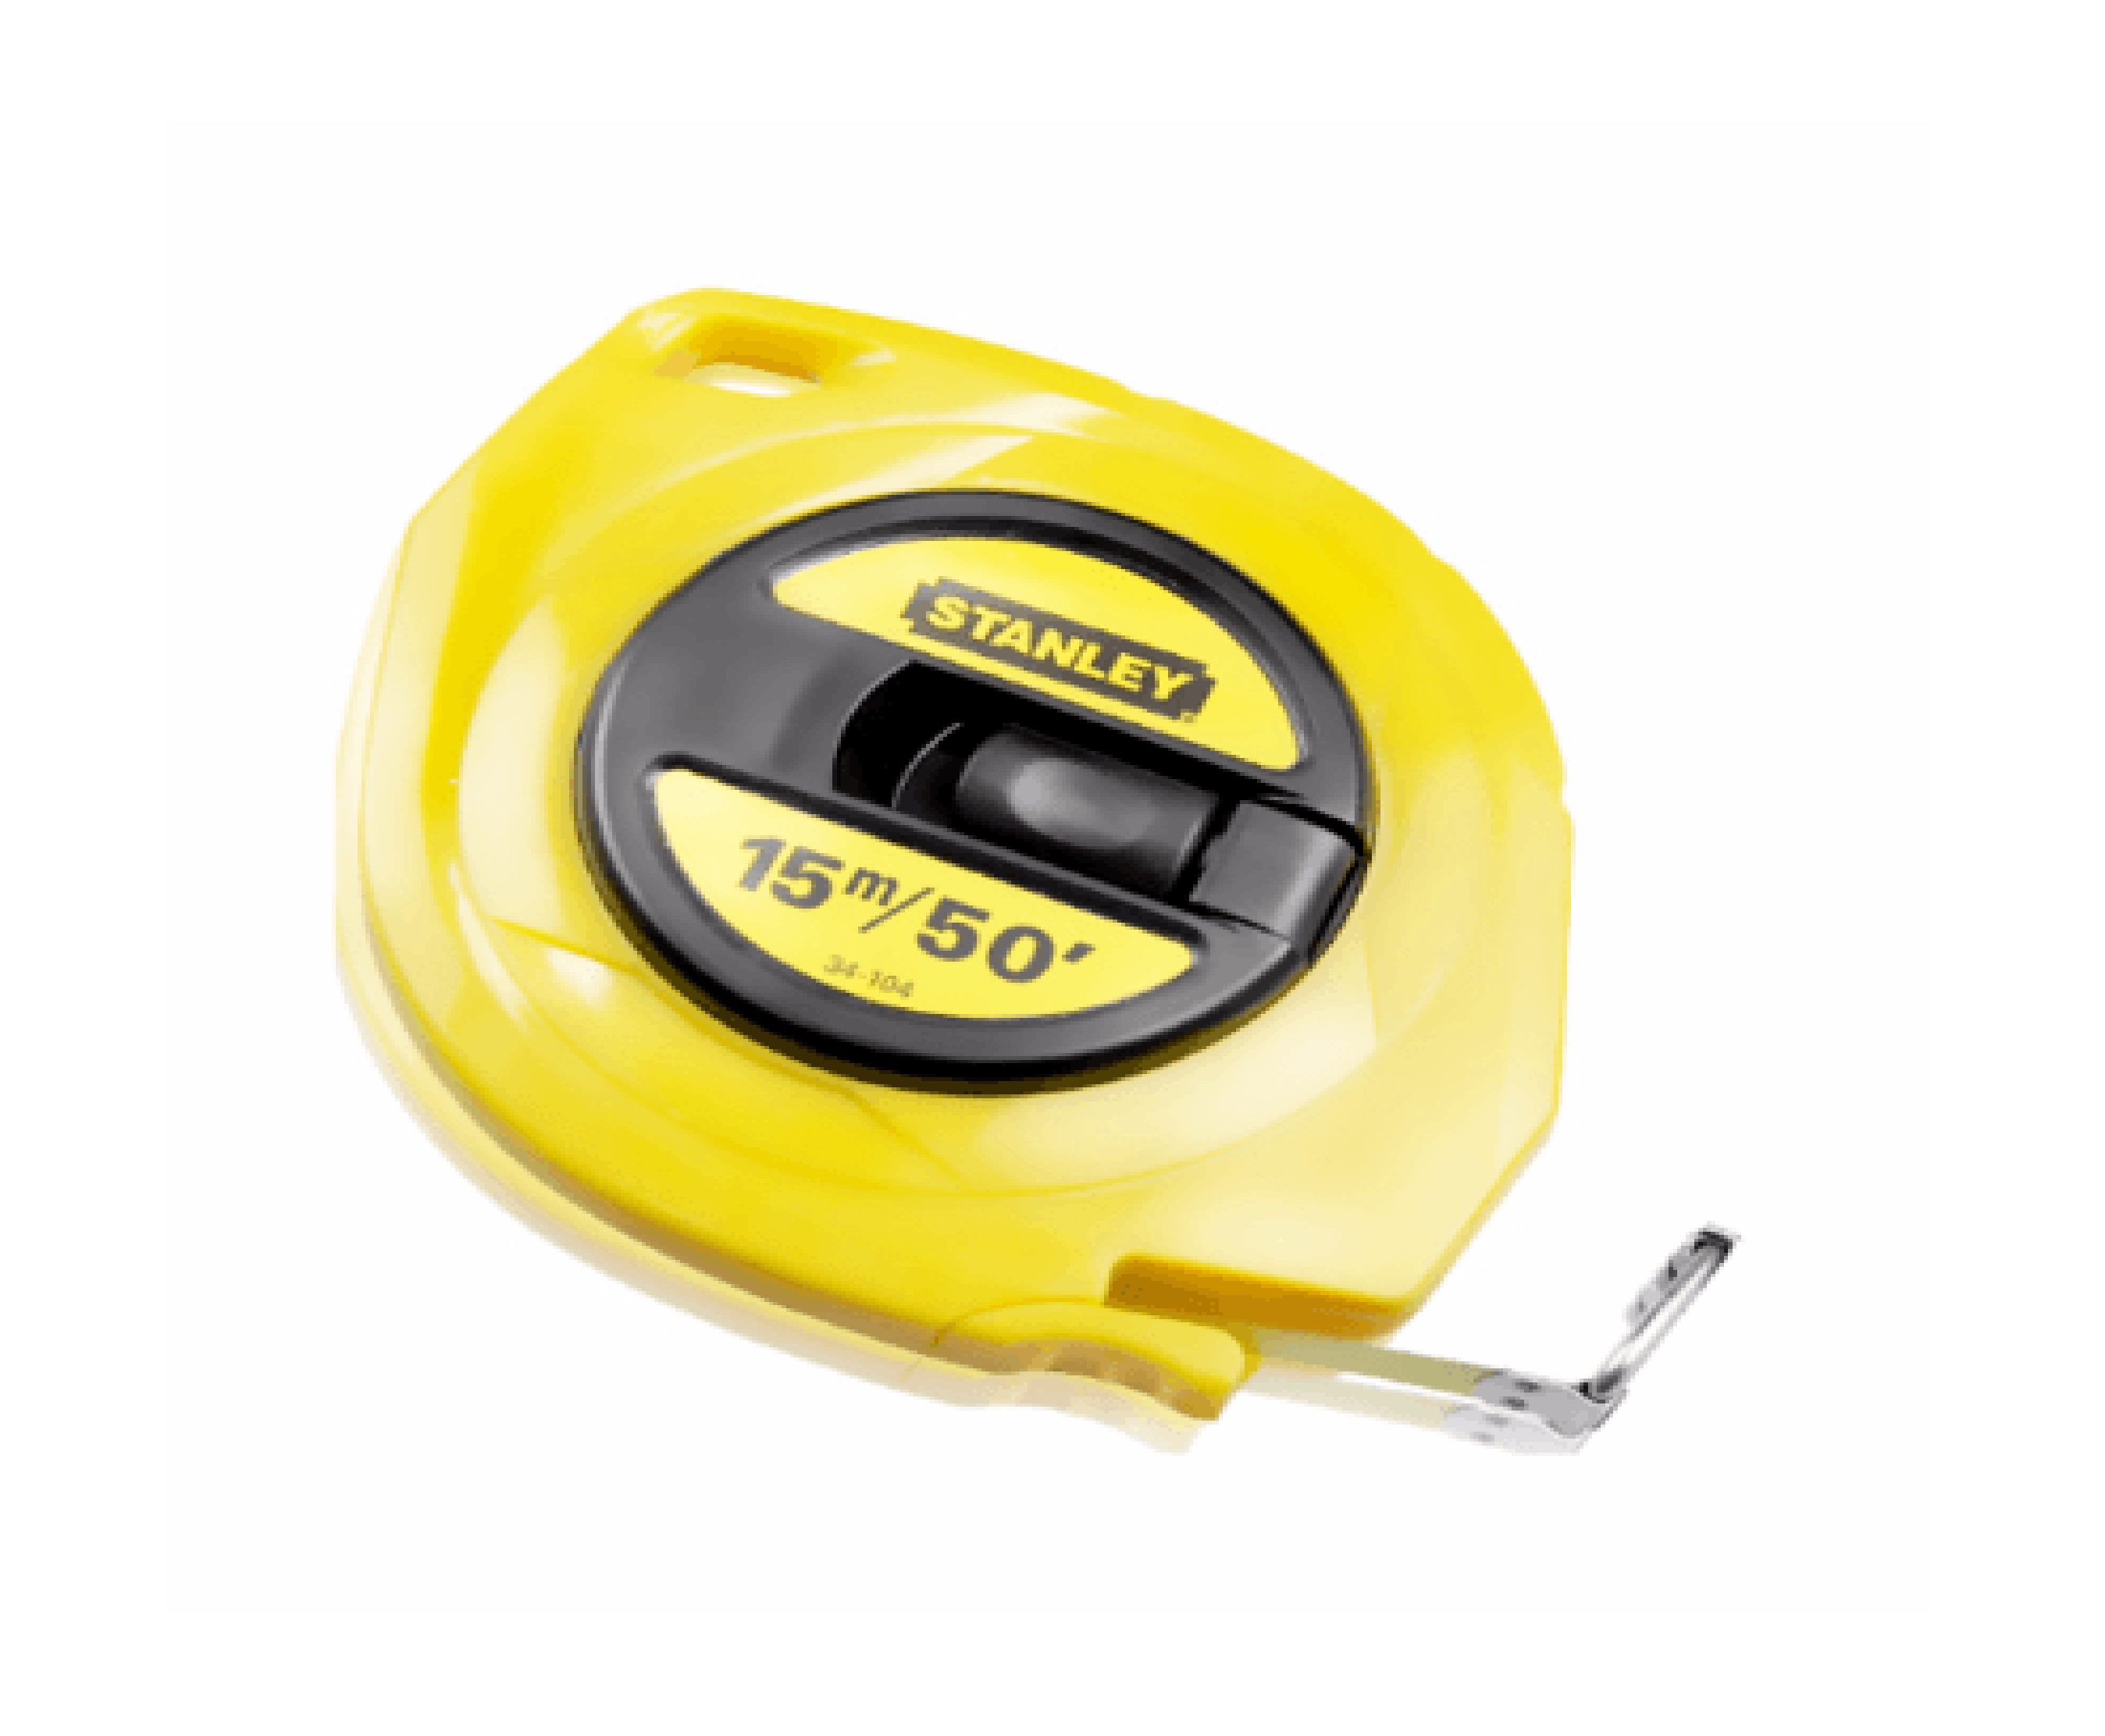 STANLEY 0-34-102 Long Tape Measure With Steel Blade (6 pcs.)